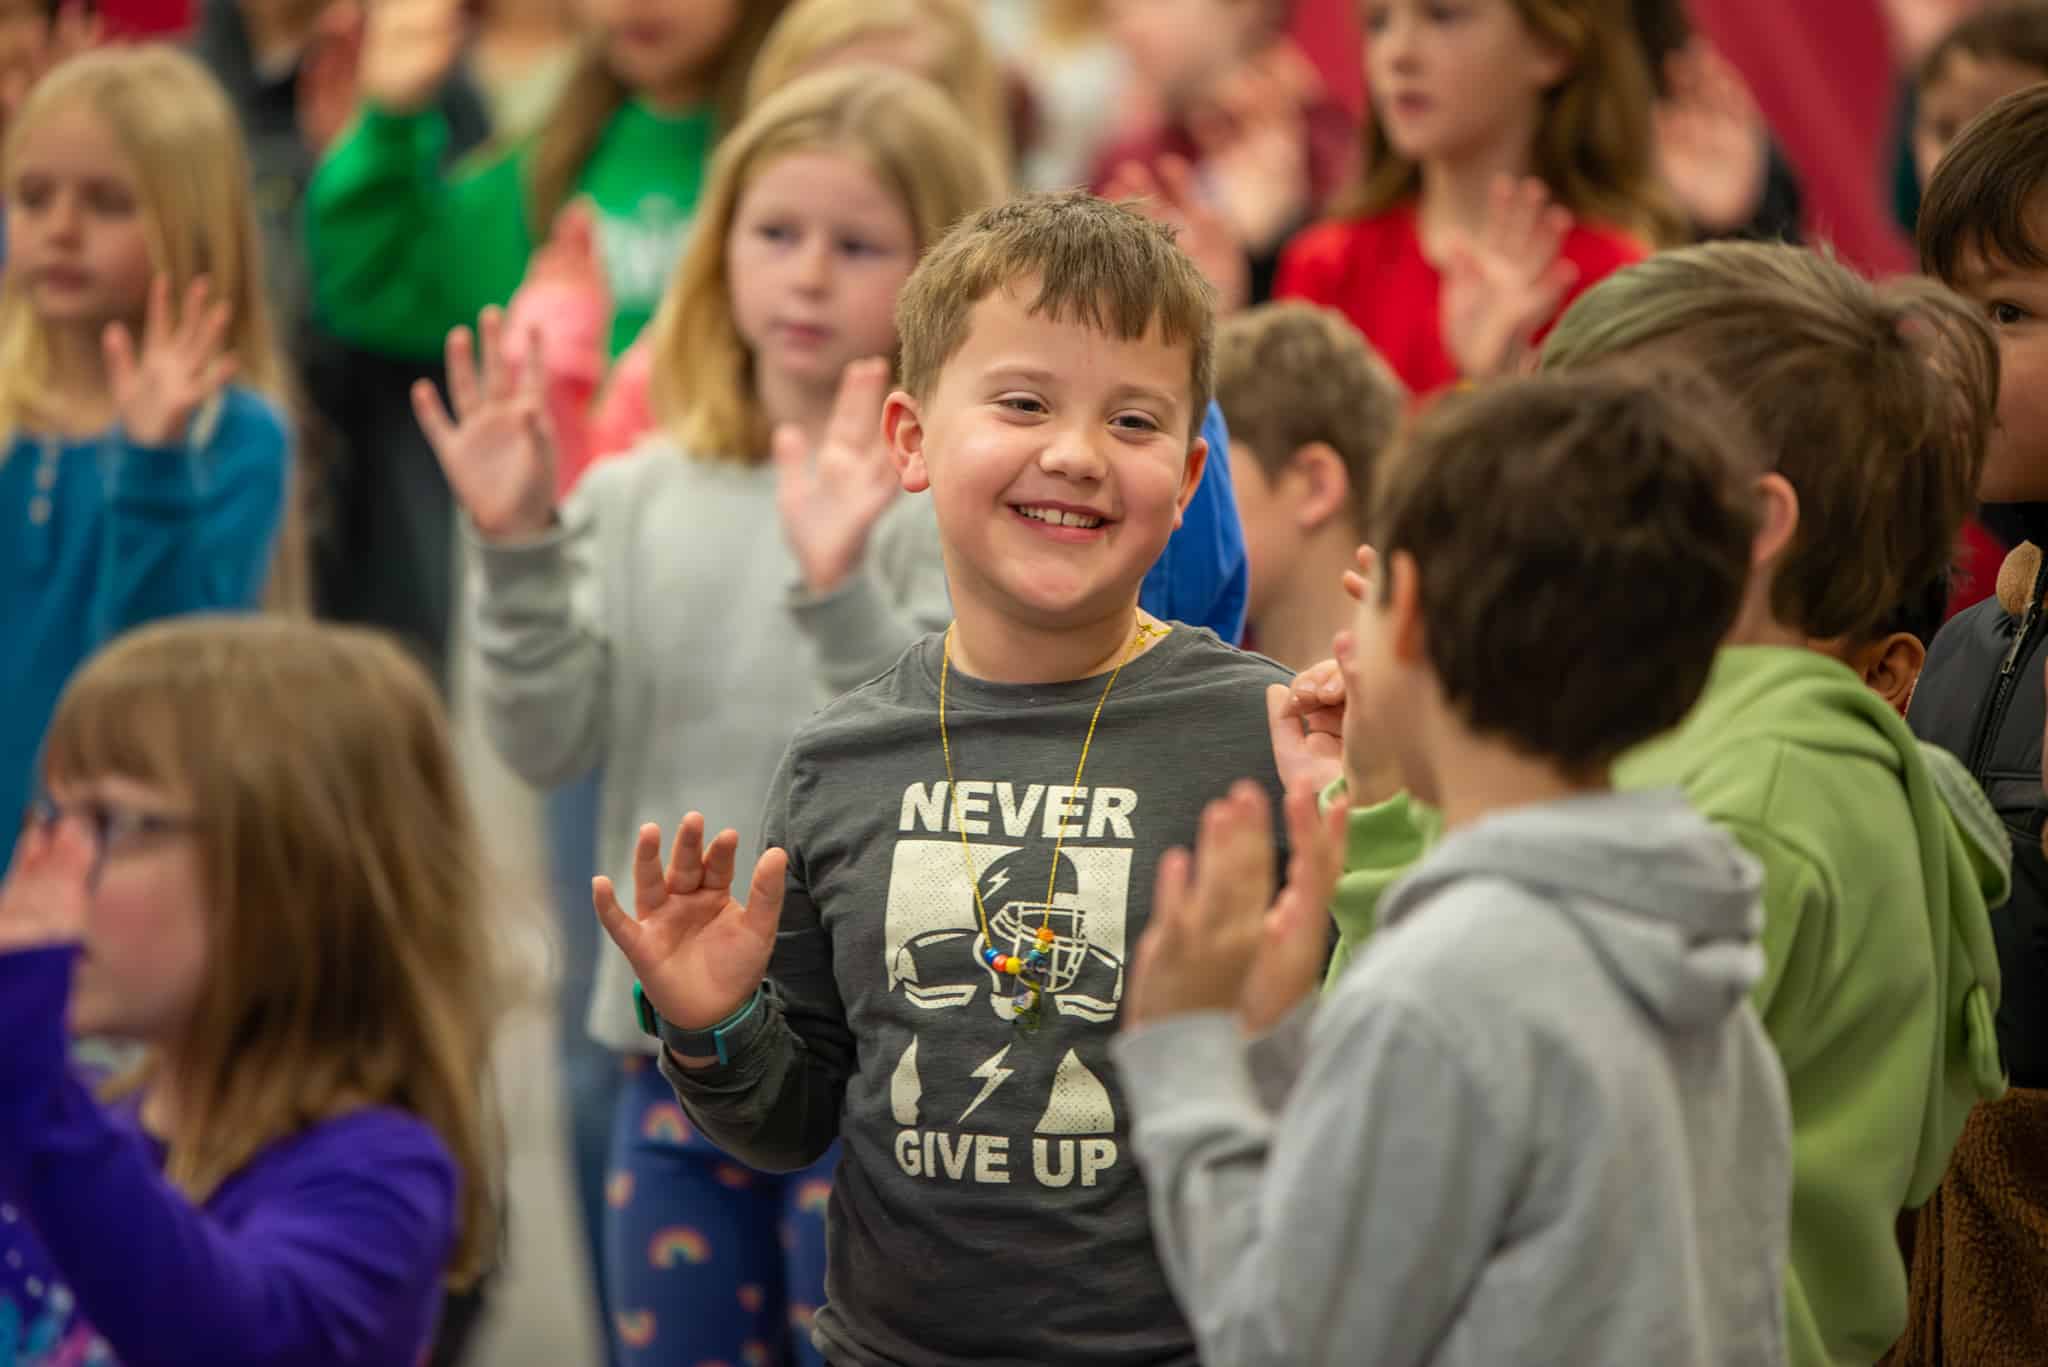 3rd grade boy standing in a crowd with both of his elbows bent so his hands are in front of his shoulders while he practices movement for a performance. He is smiling. Kids around him are in the same position.